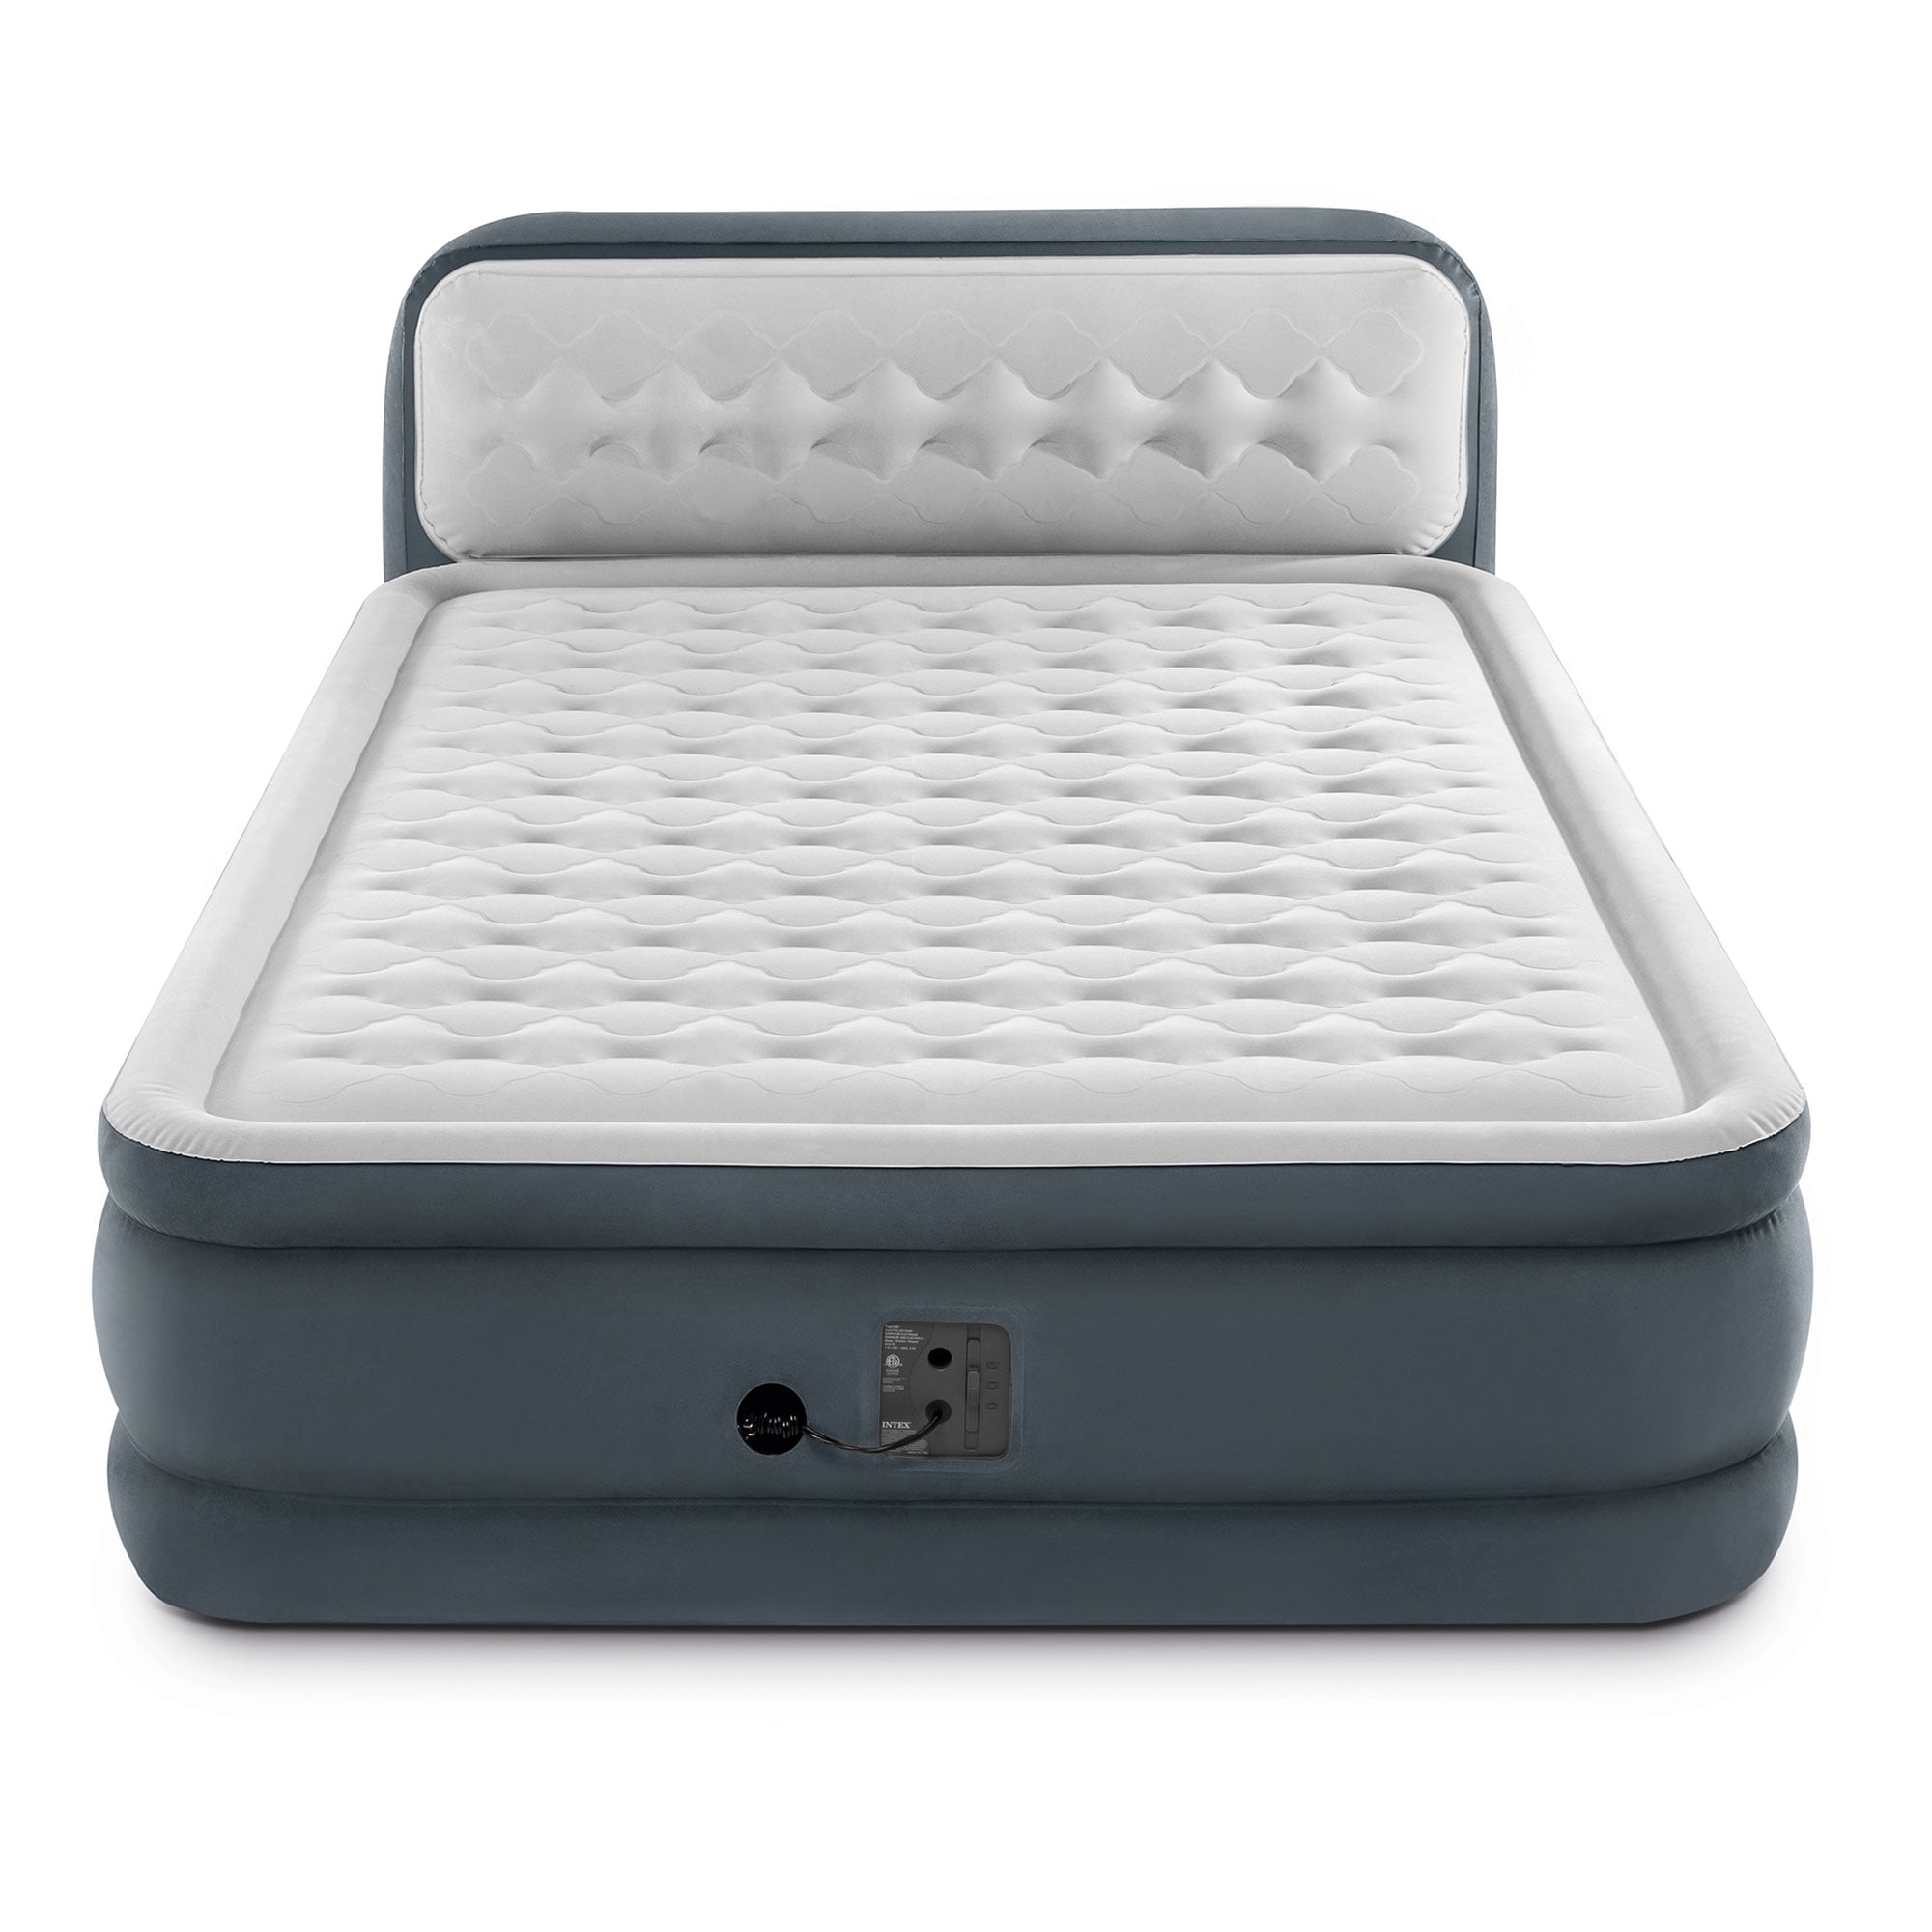 Size King Intex 64137VM Inflatable Mattress with Built-in Pump Grey for sale online 